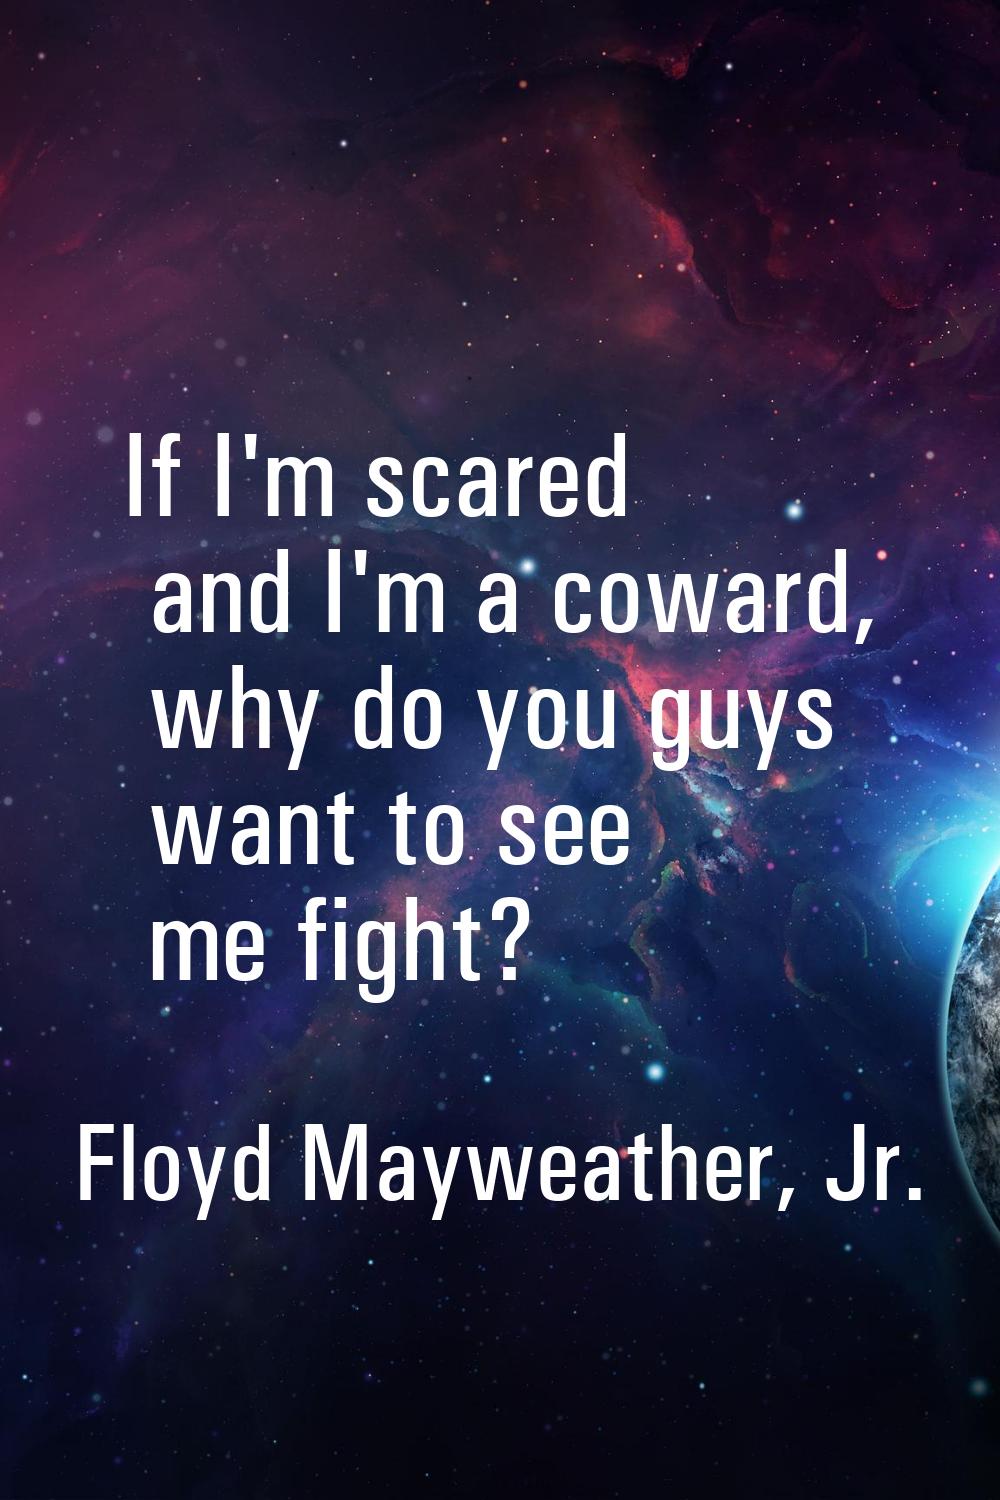 If I'm scared and I'm a coward, why do you guys want to see me fight?